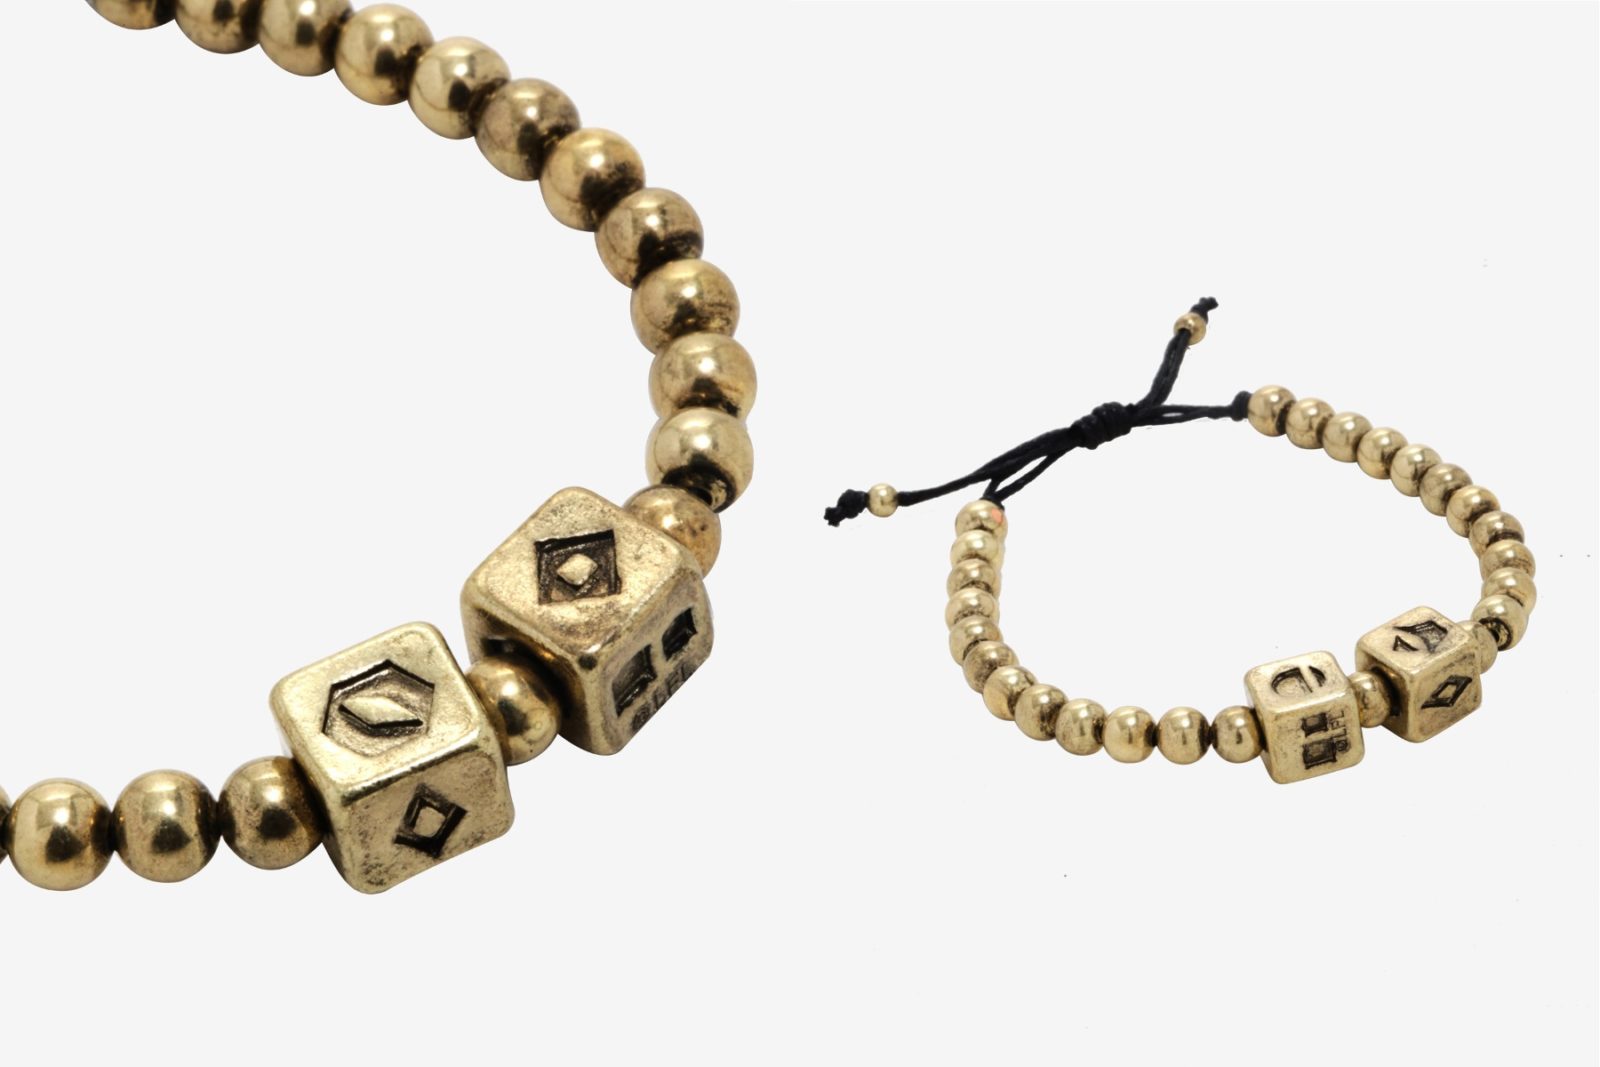 Star Wars Solo A Star Wars Story Dice Beaded Bracelet available exclusively at Box Lunch